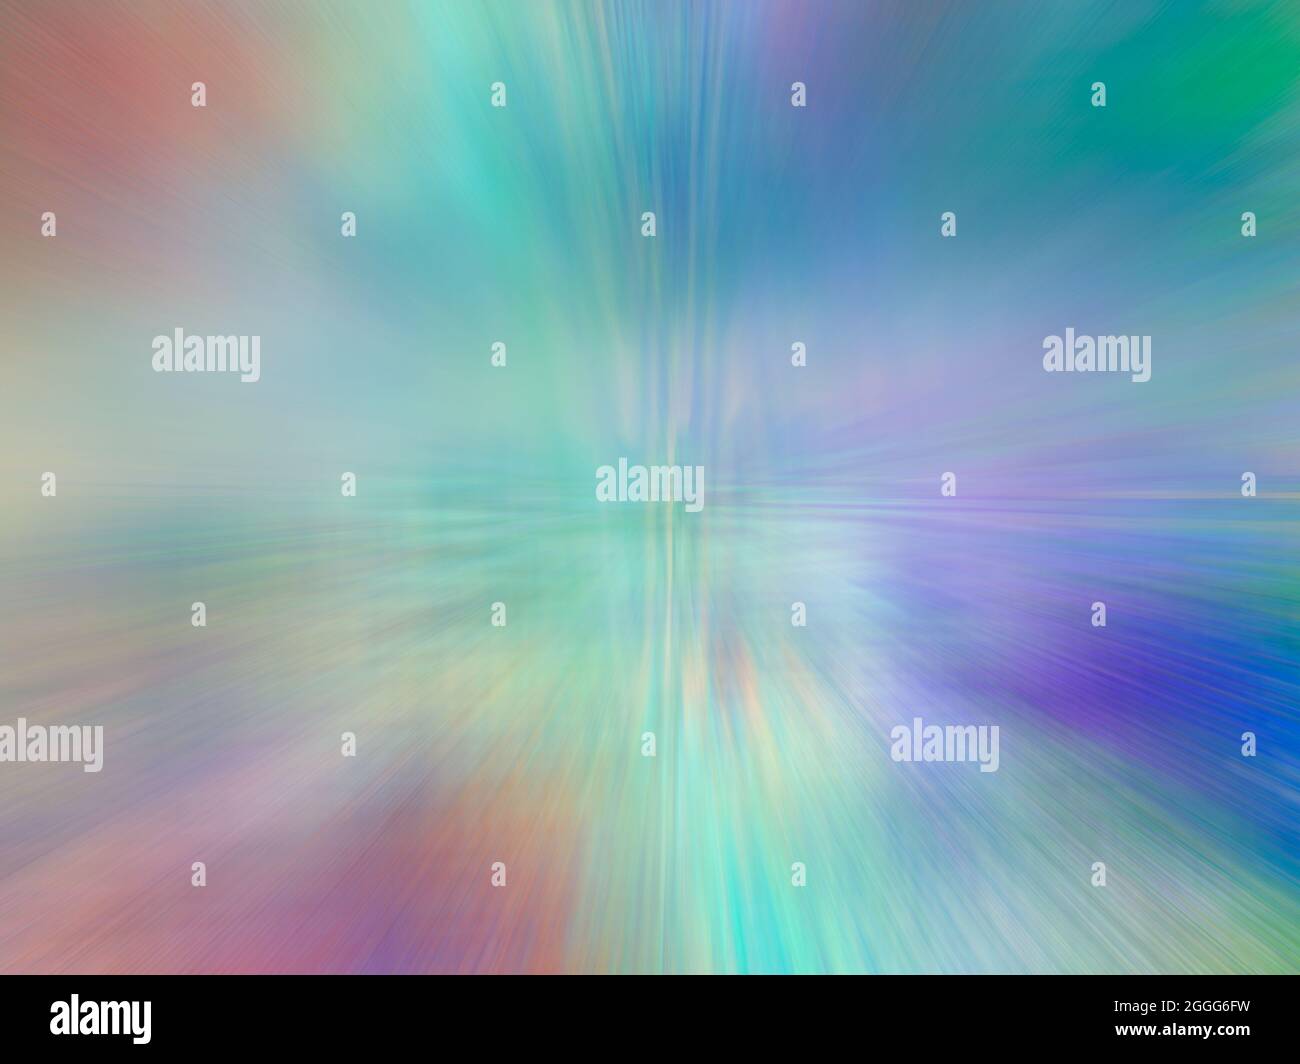 Abstract motion blur background - computer generated 3d illustration Stock Photo